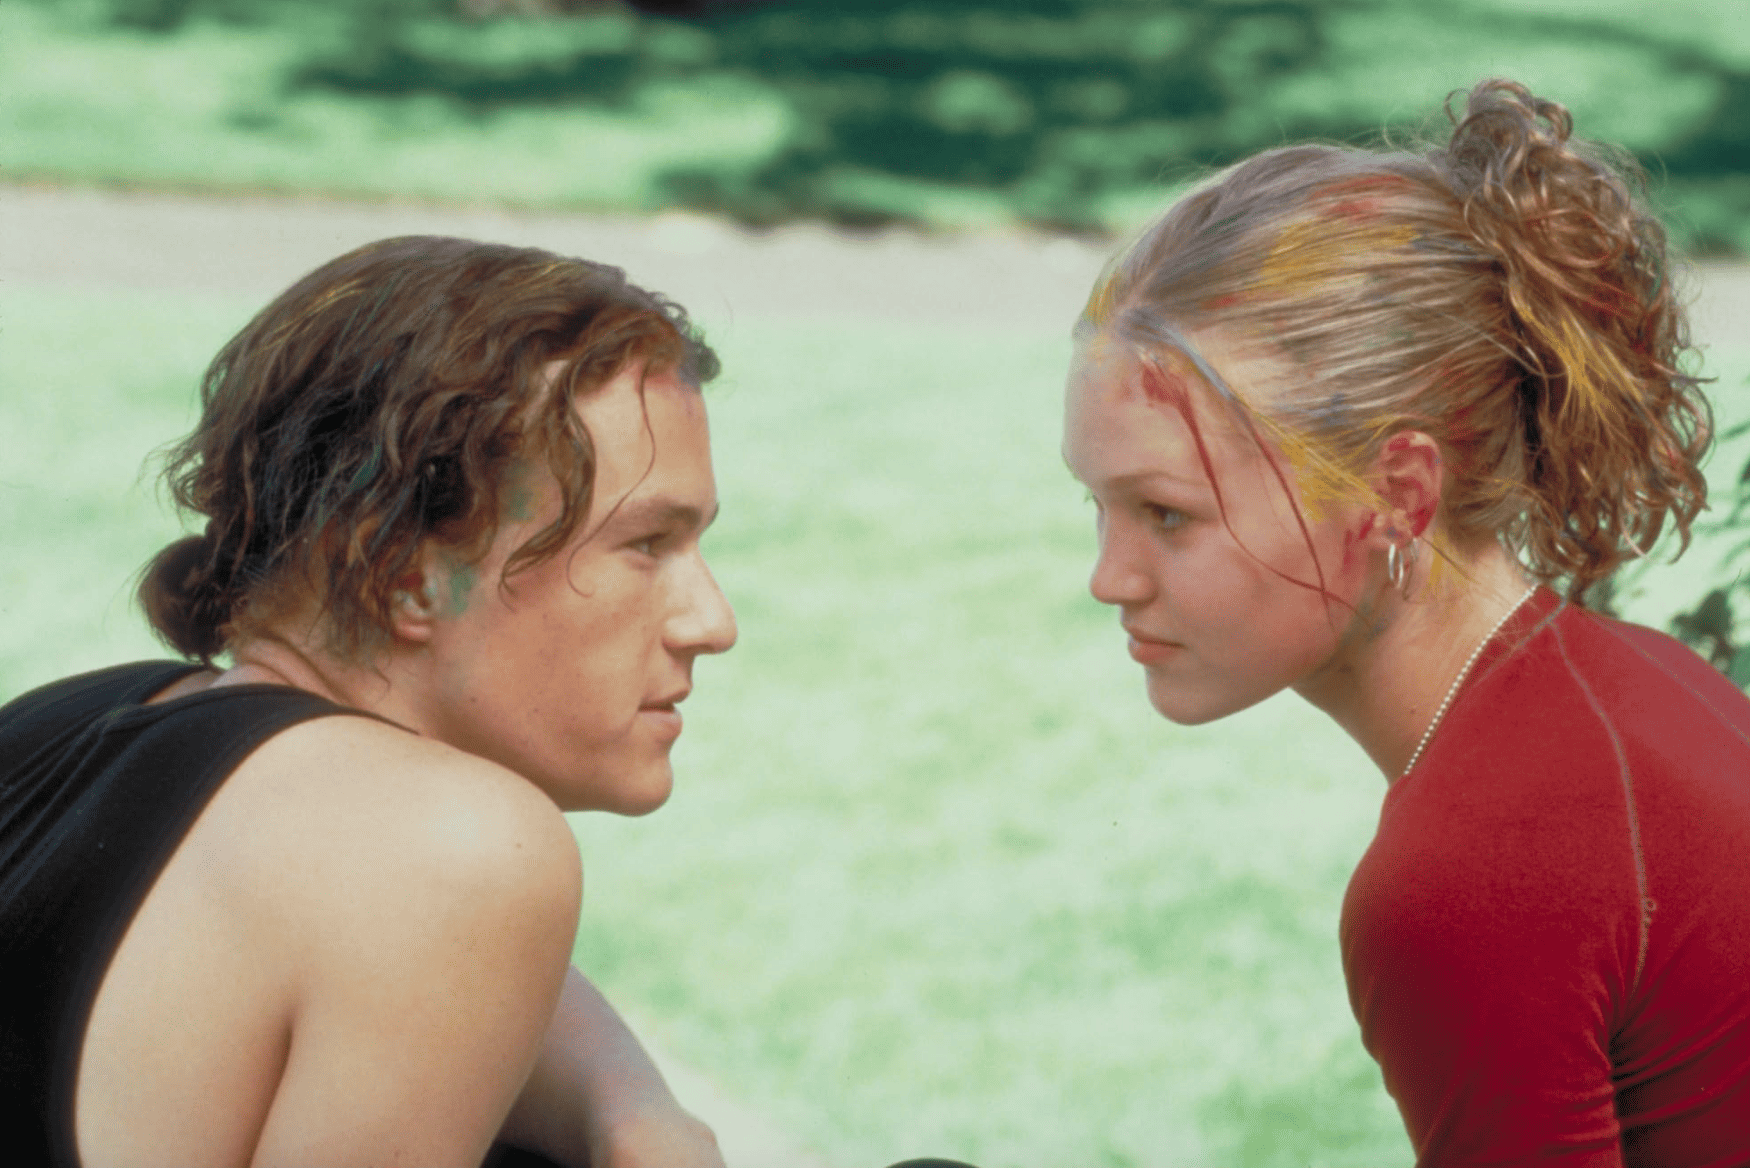 Two misunderstood teens connect in this image from Touchstone Pictures.